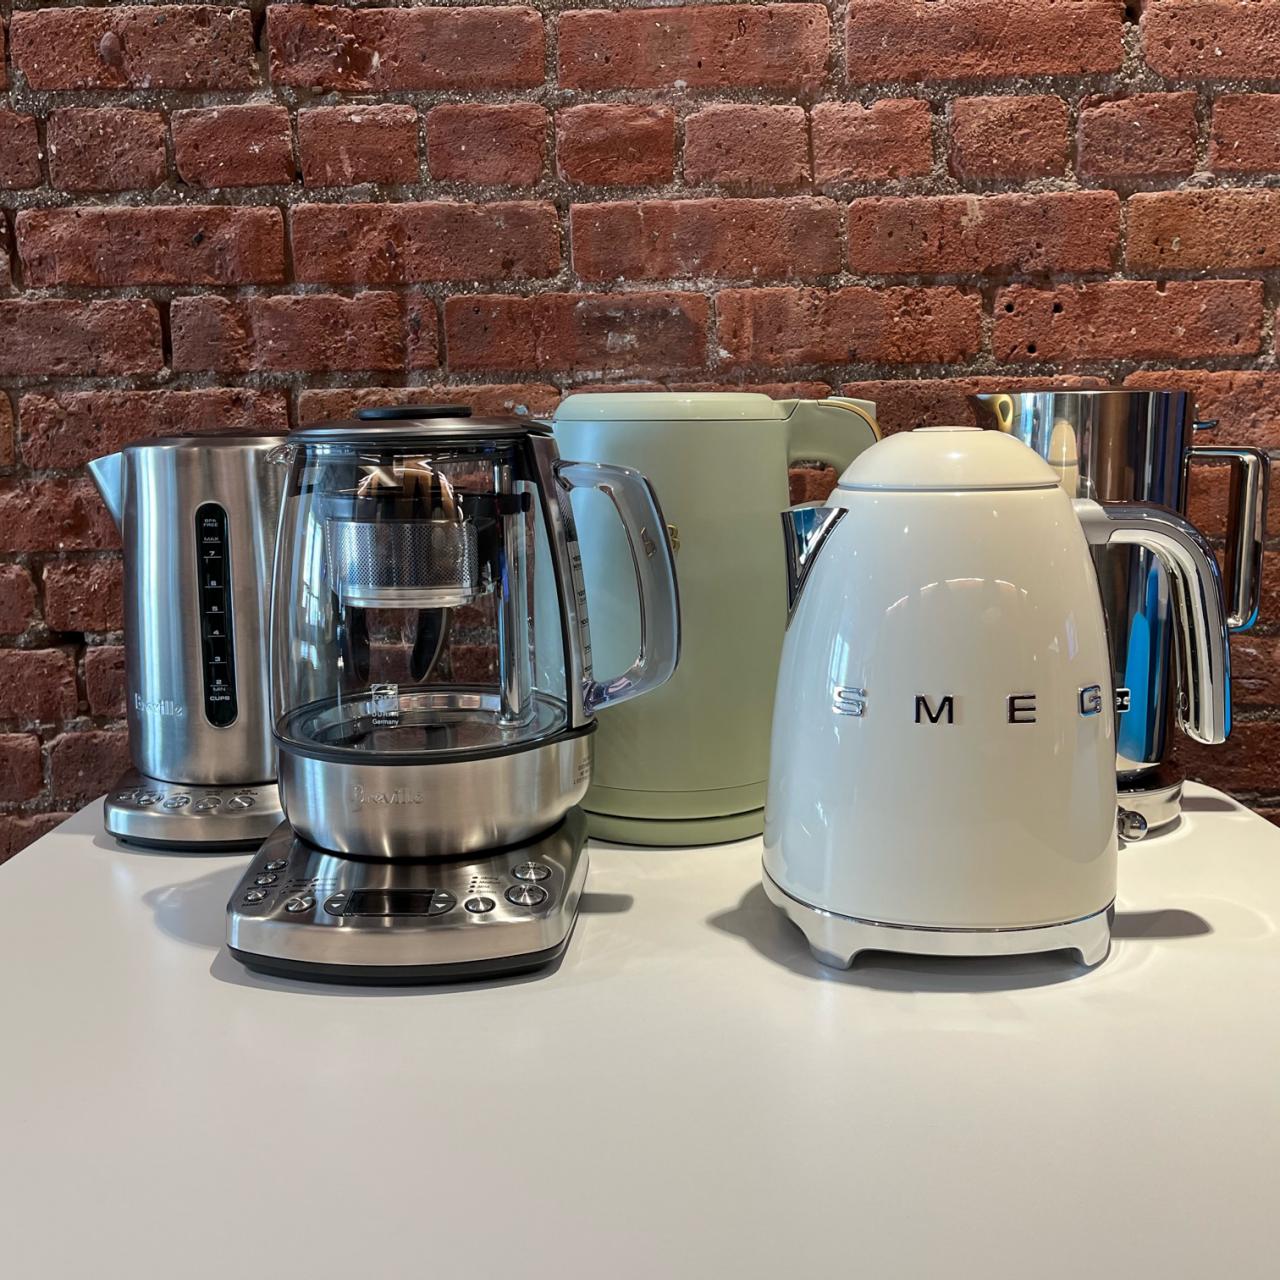 How to Clean an Electric Kettle: 5 Quick & Easy Ways